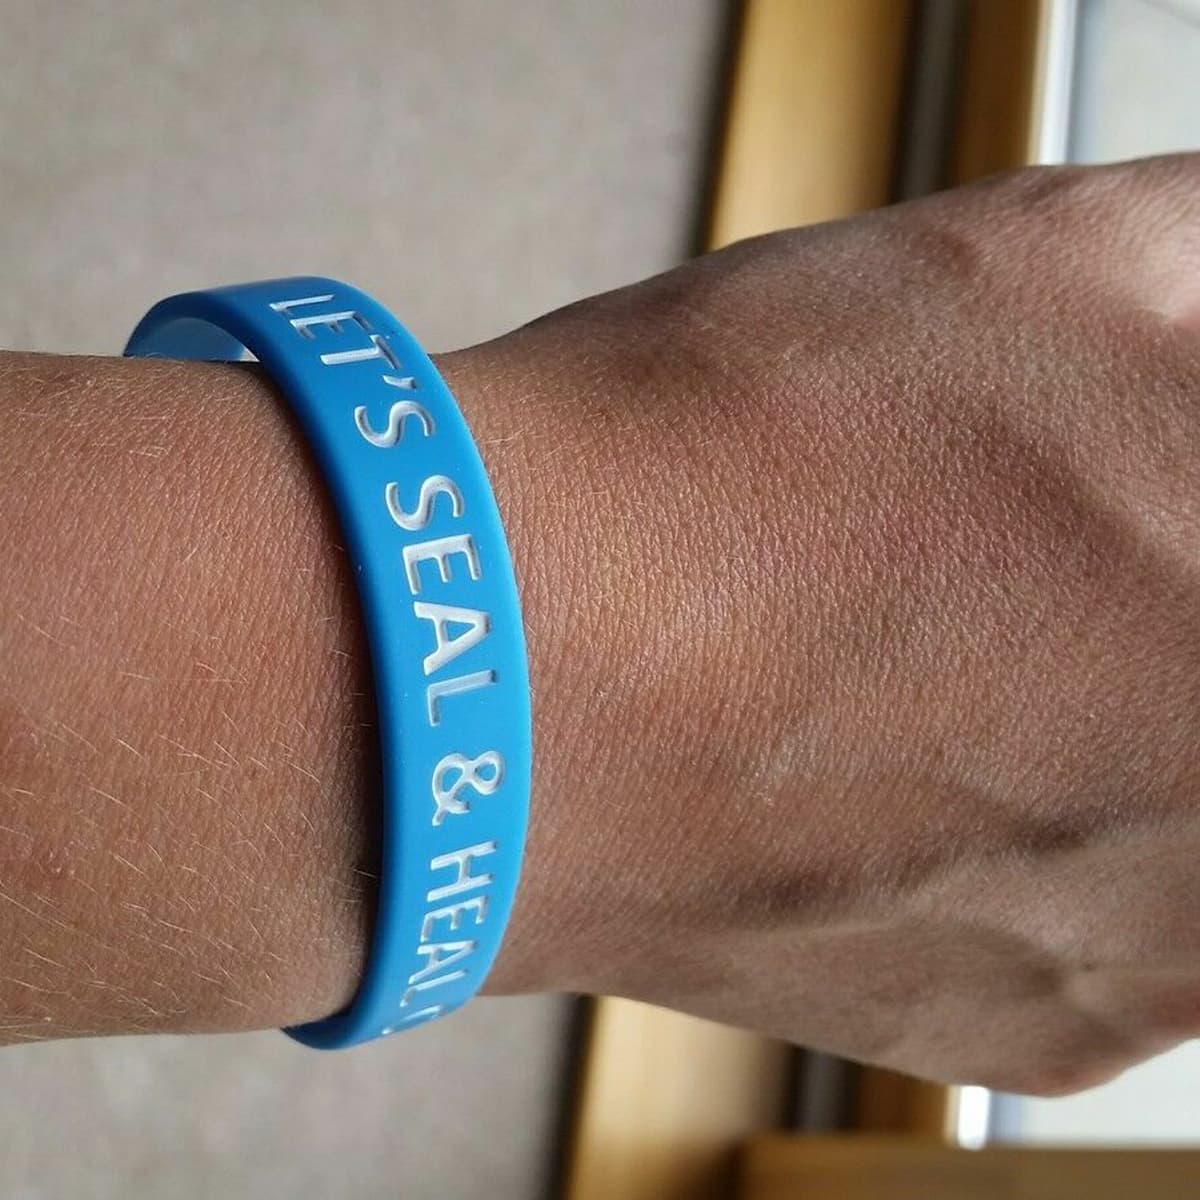 A wrist with a blue wrist band that says "let's seal and heal csf leaks".